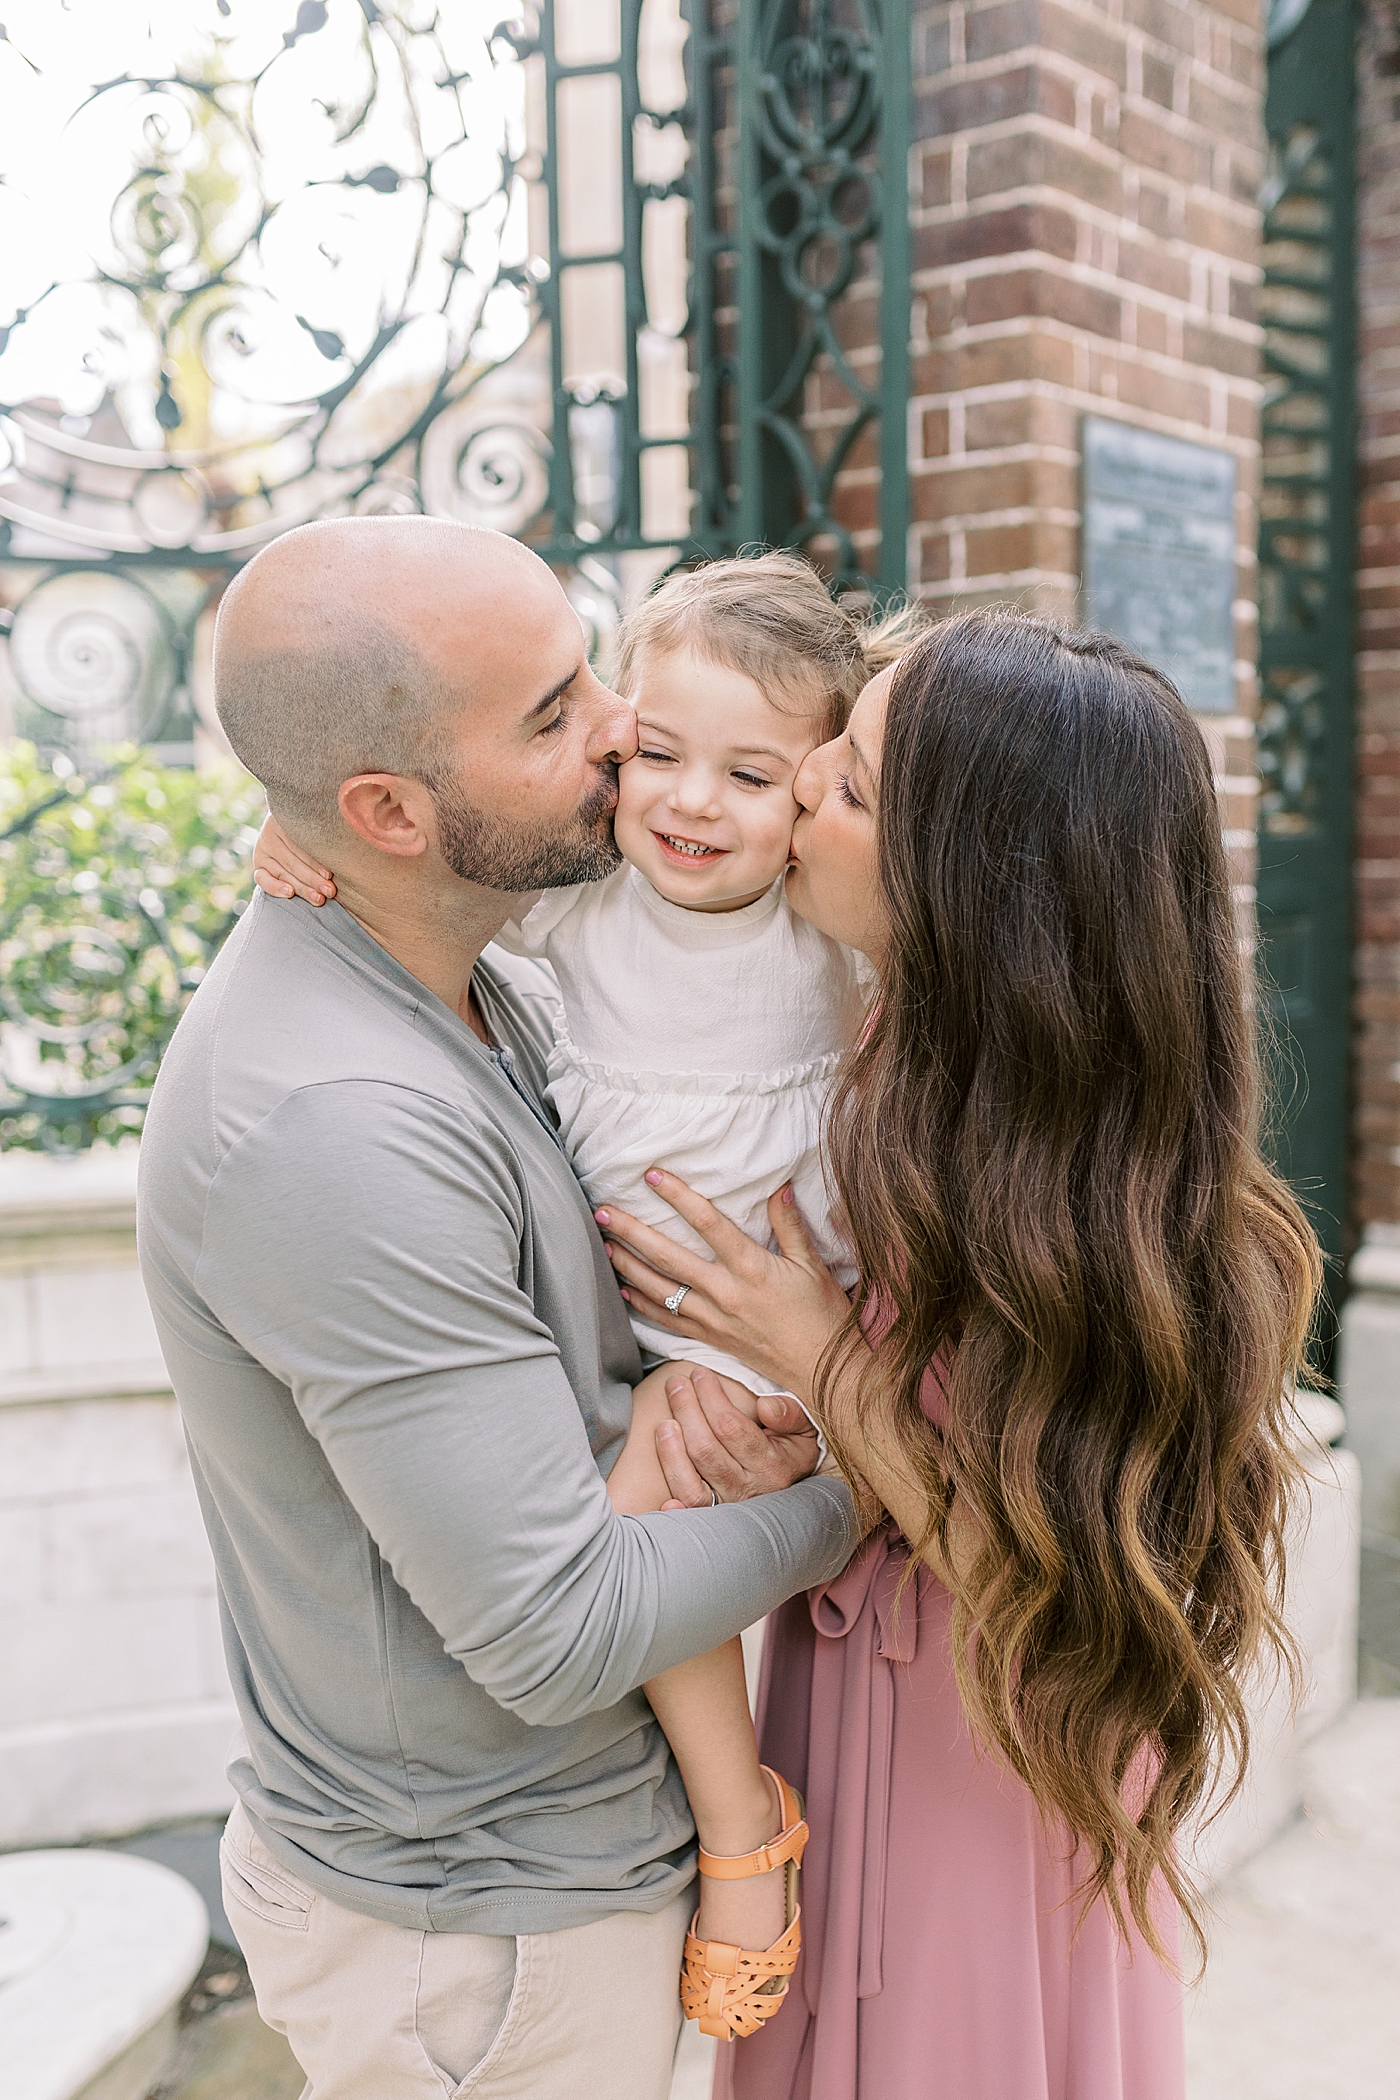 Mom and dad kissing their baby girl on the cheek | Photo by Caitlyn Motycka Photography